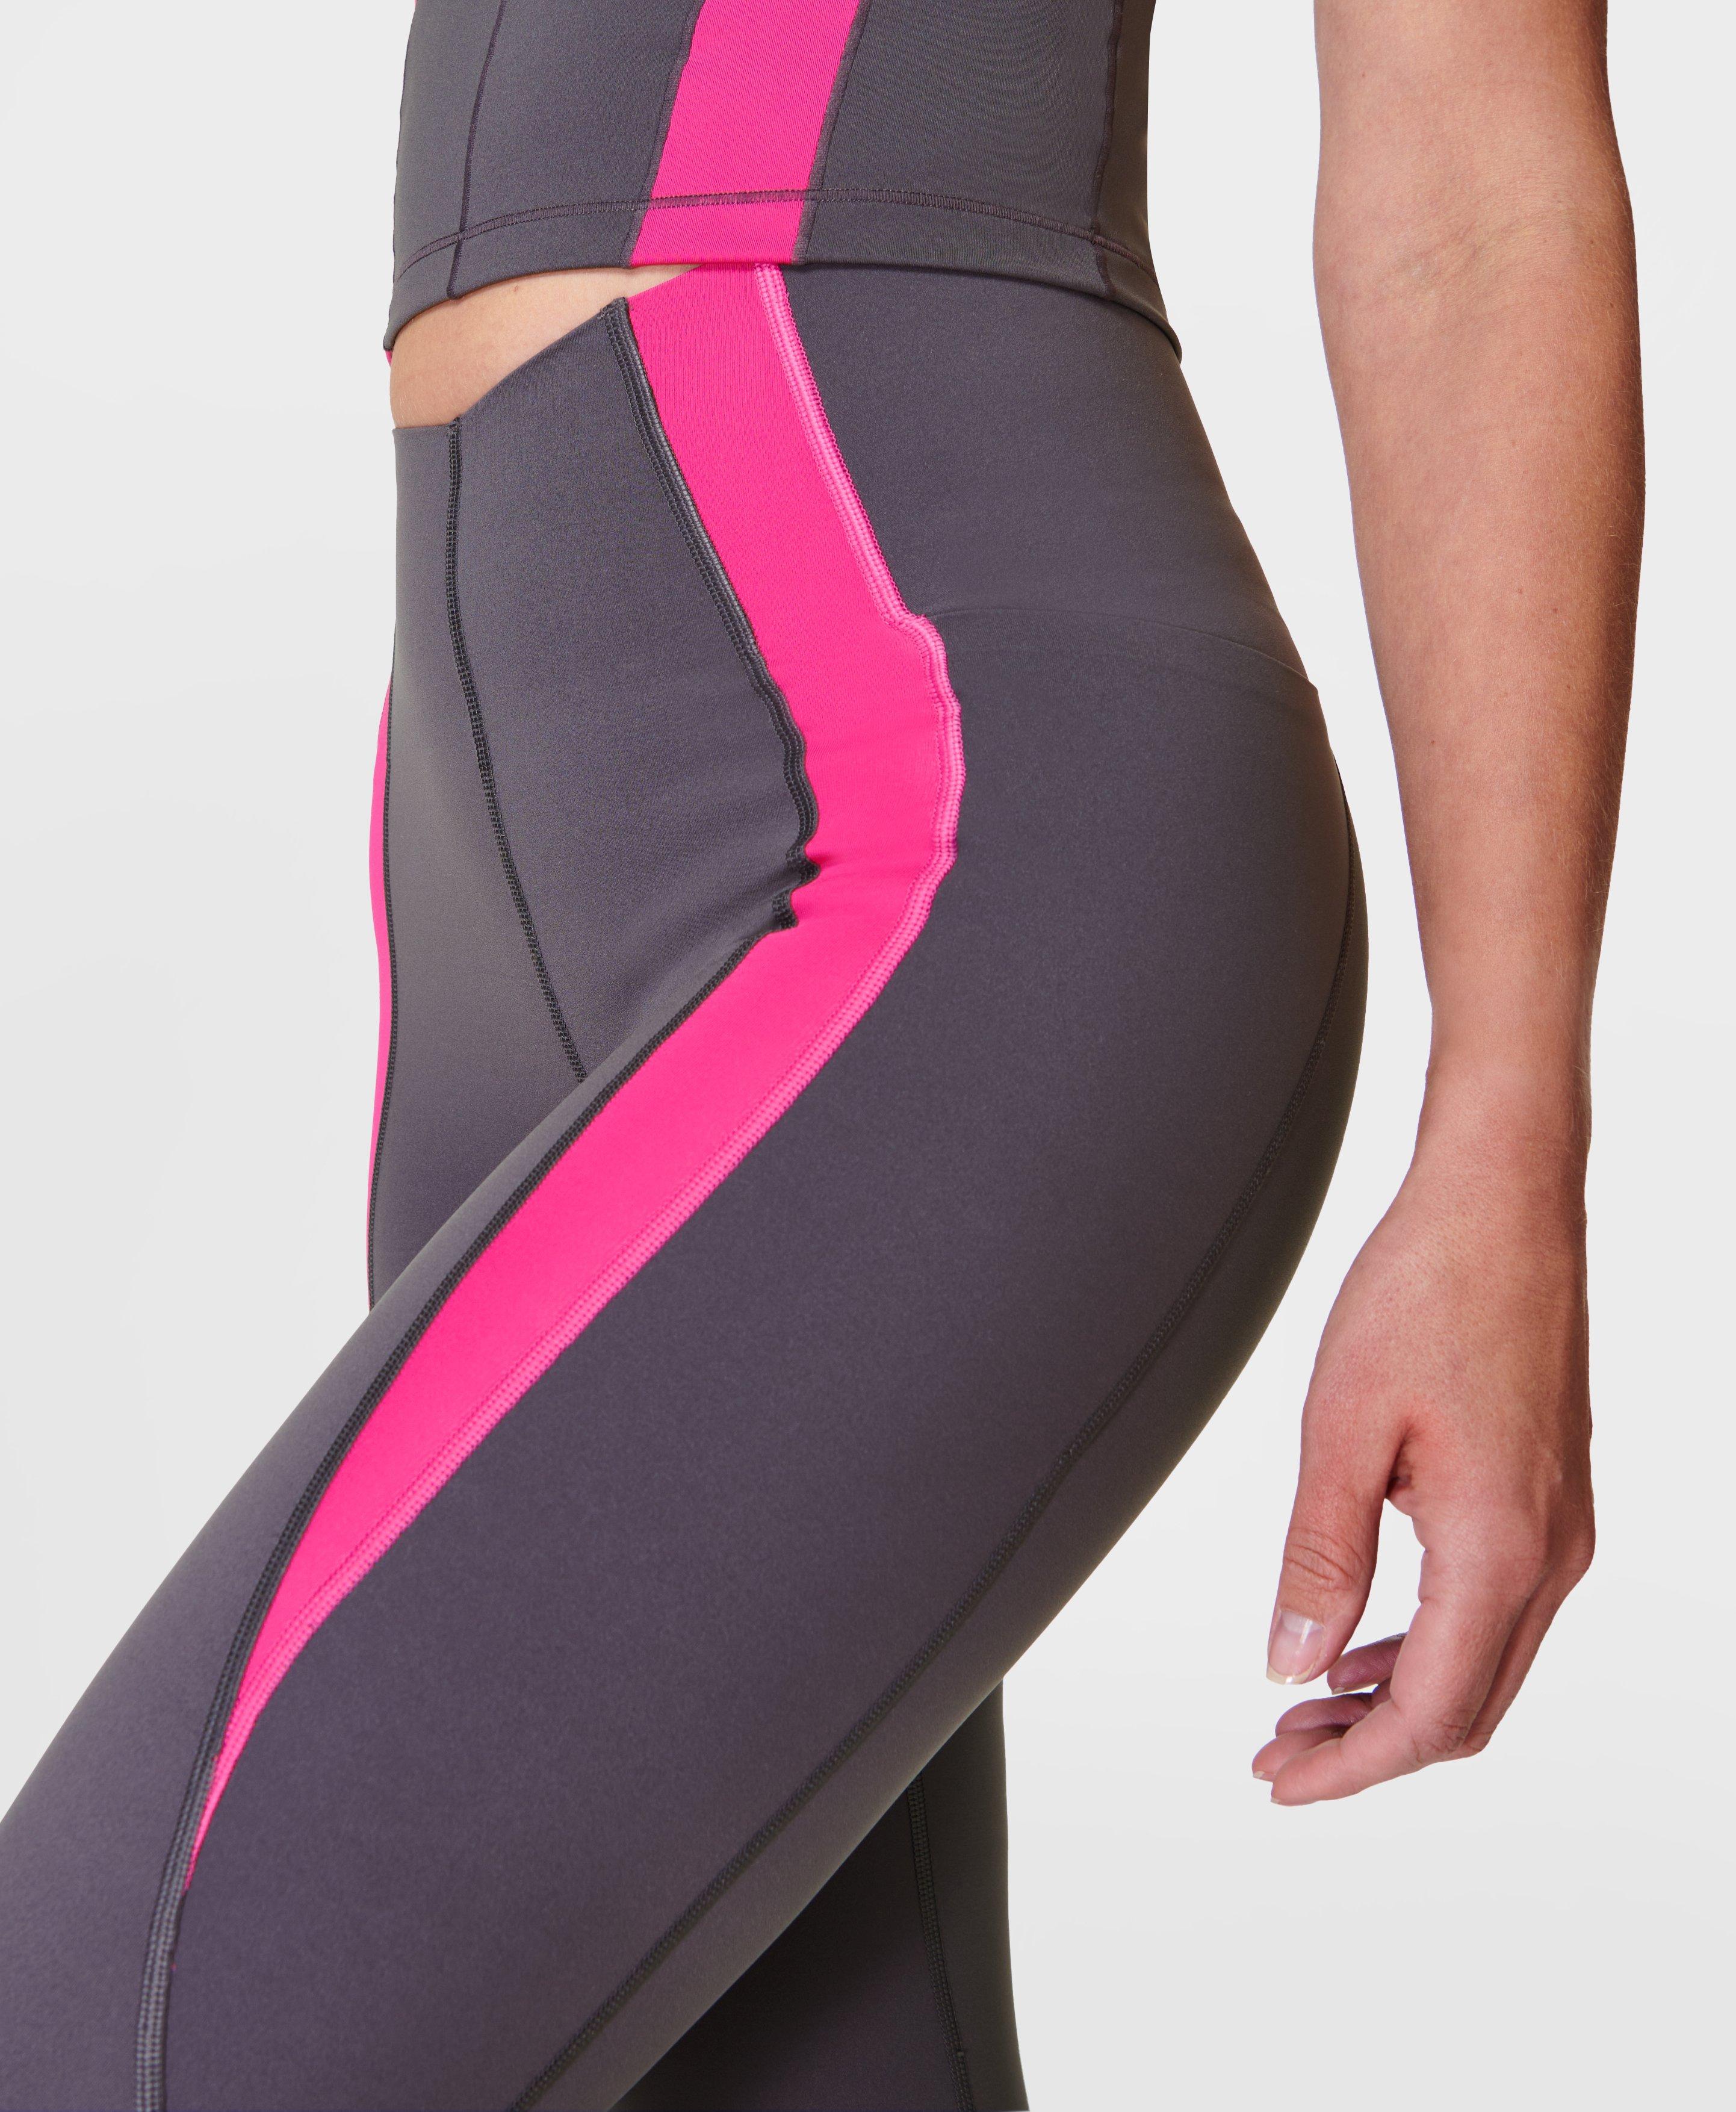 CARBON A set of leggings with a wide belt, a high waist (without a